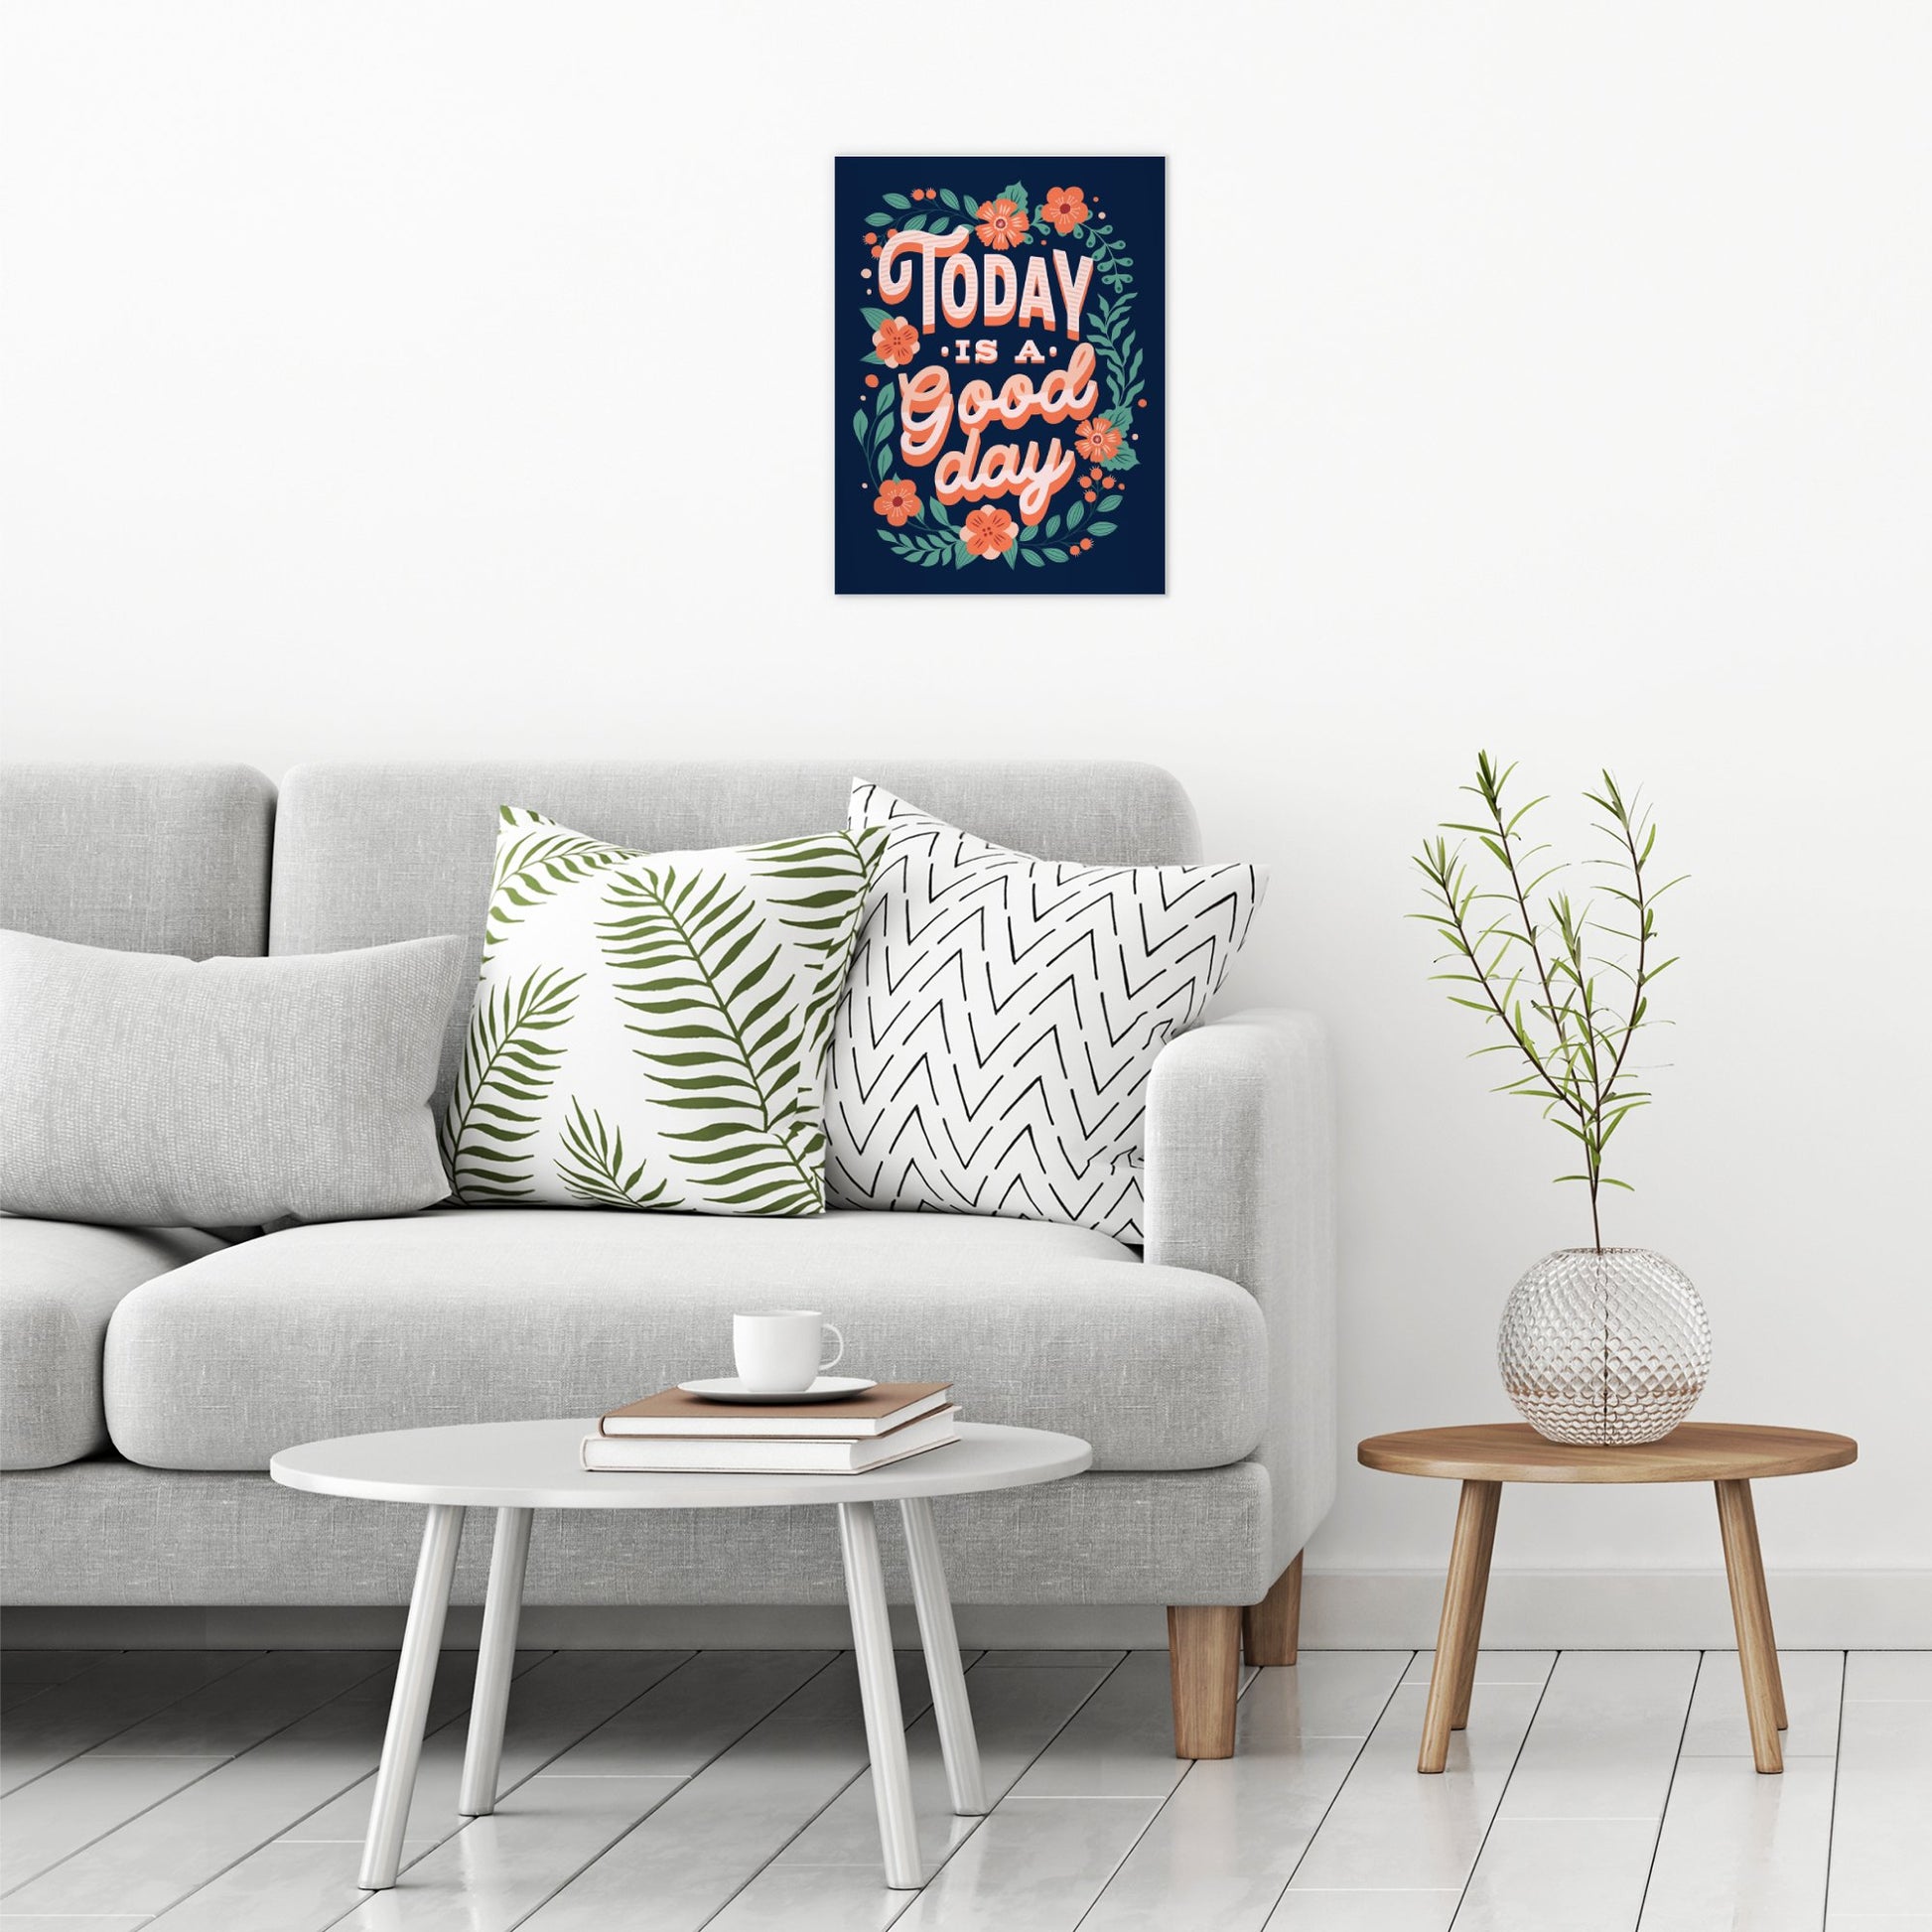 A contemporary modern room view showing a medium size metal art poster display plate with printed design of a Today is a Good Day Inspirational Quote